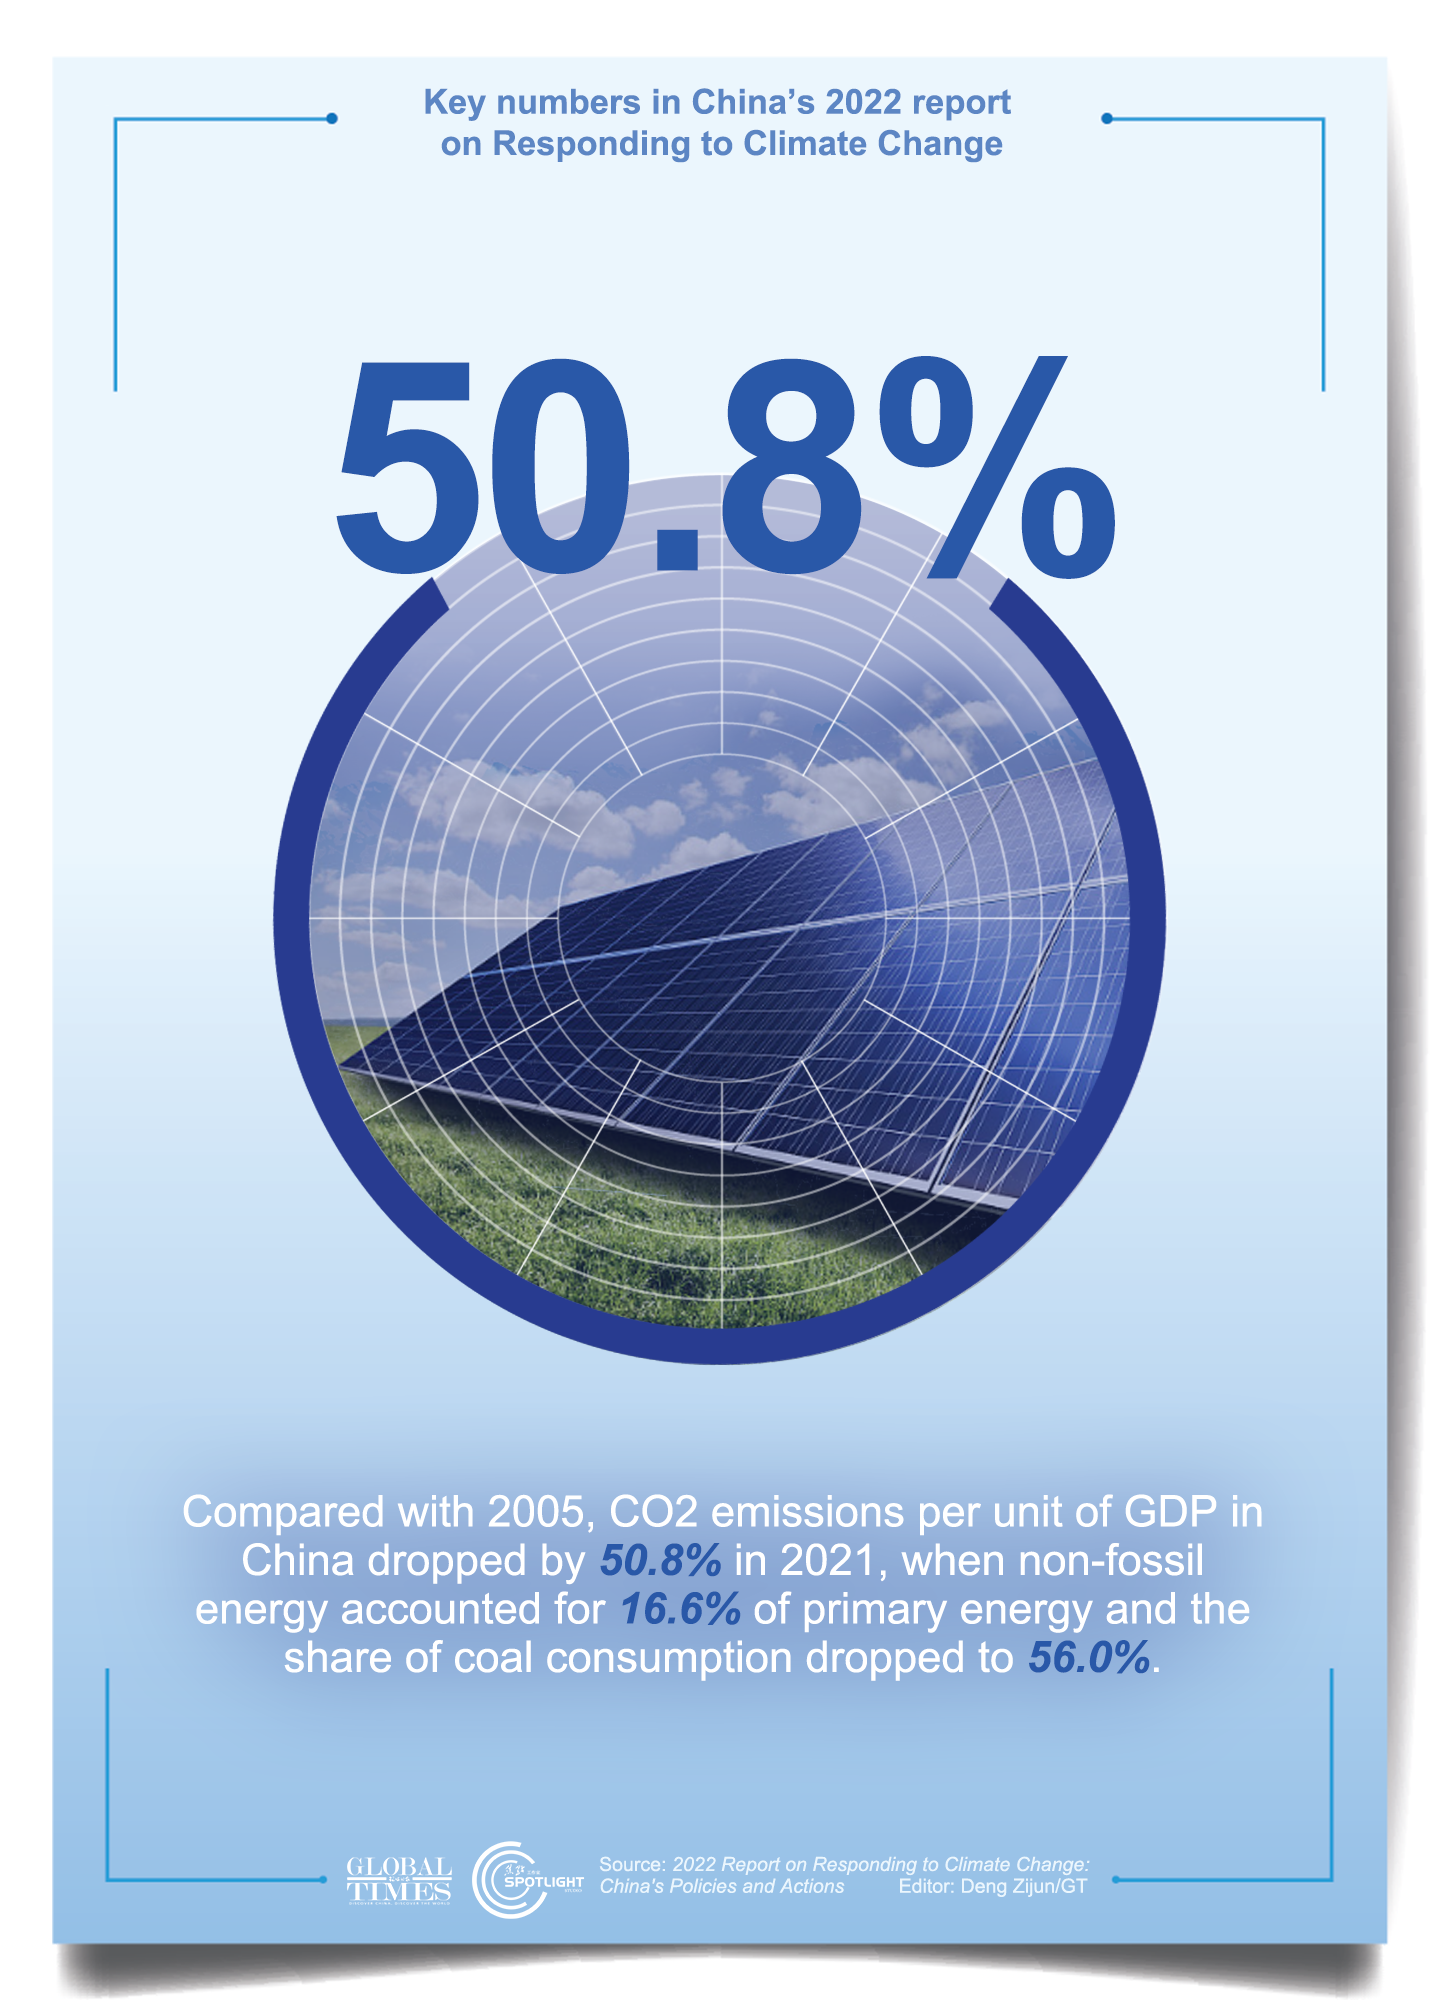 Key numbers in China’s 2022 report on Responding to Climate Change Graphic: Deng Zijun/GT